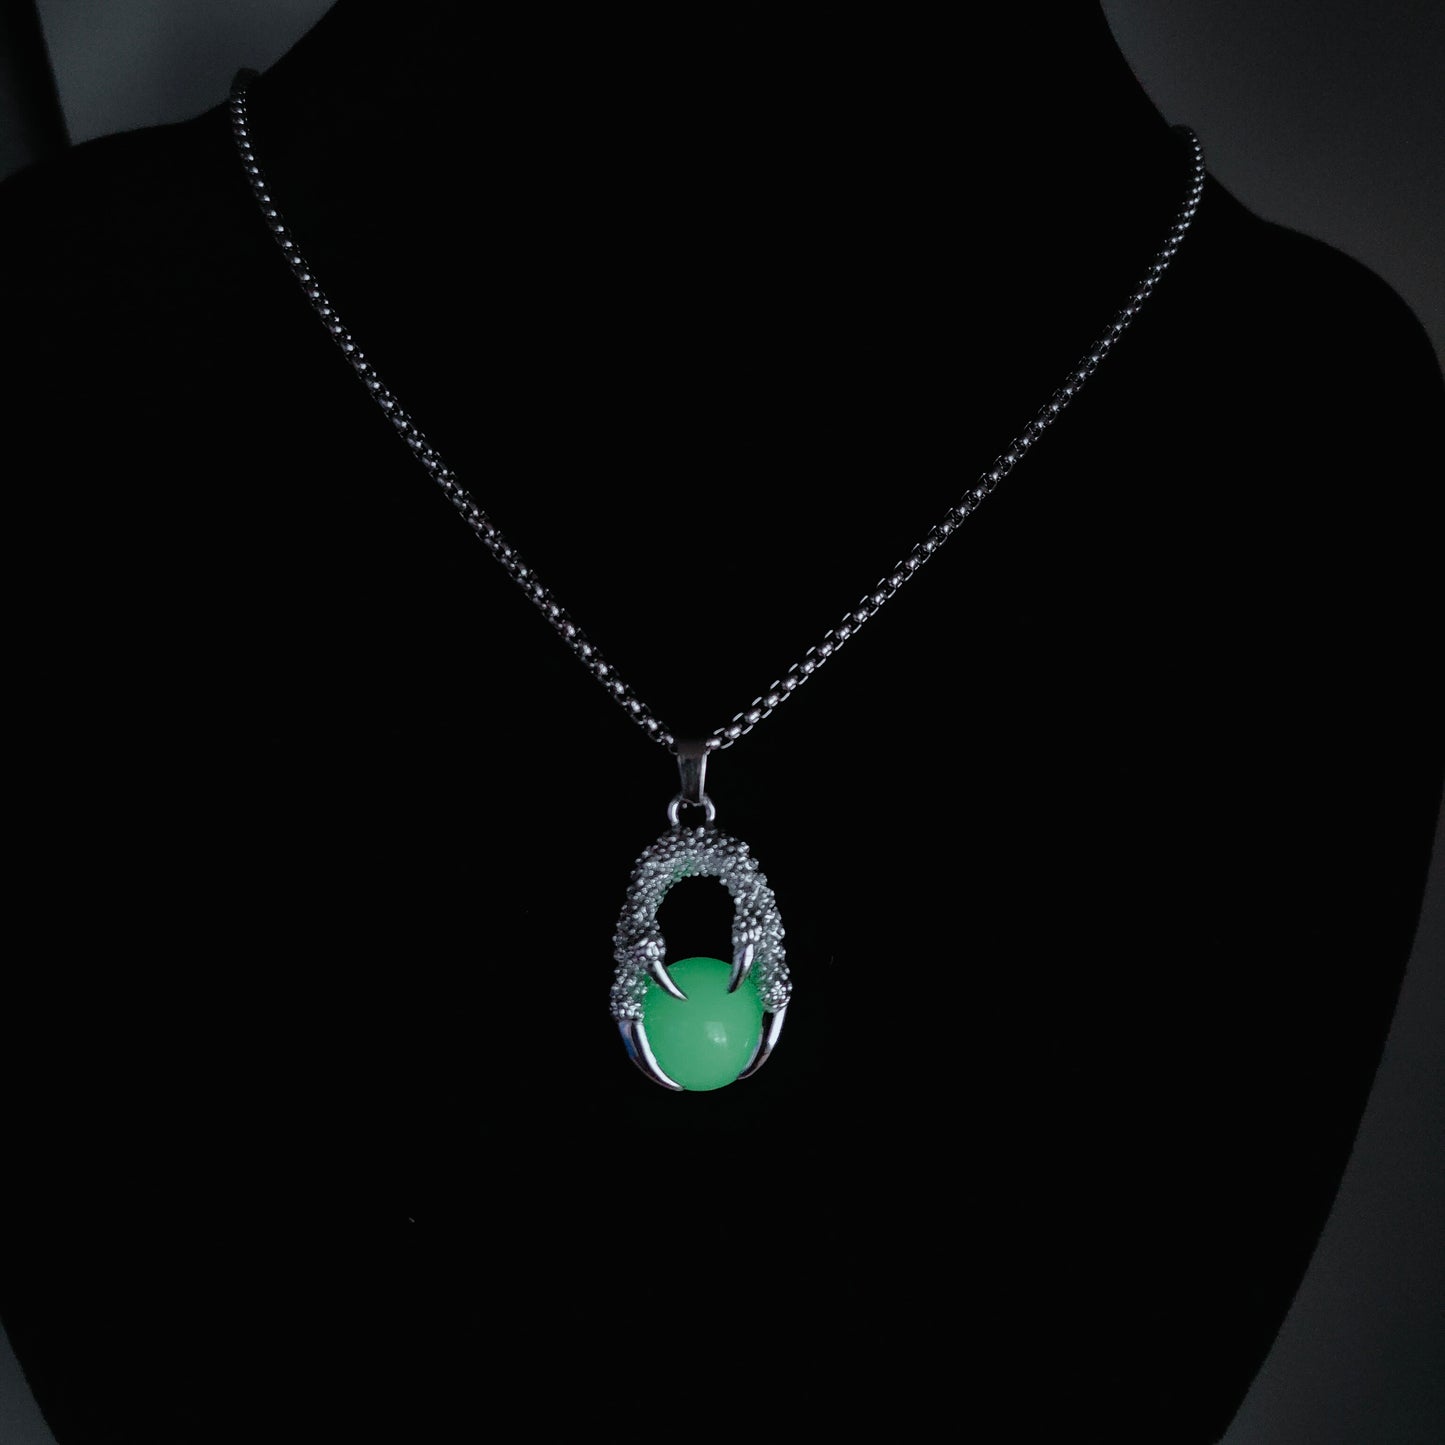 Glow in the Dark Dragon Claw Pendant and necklace